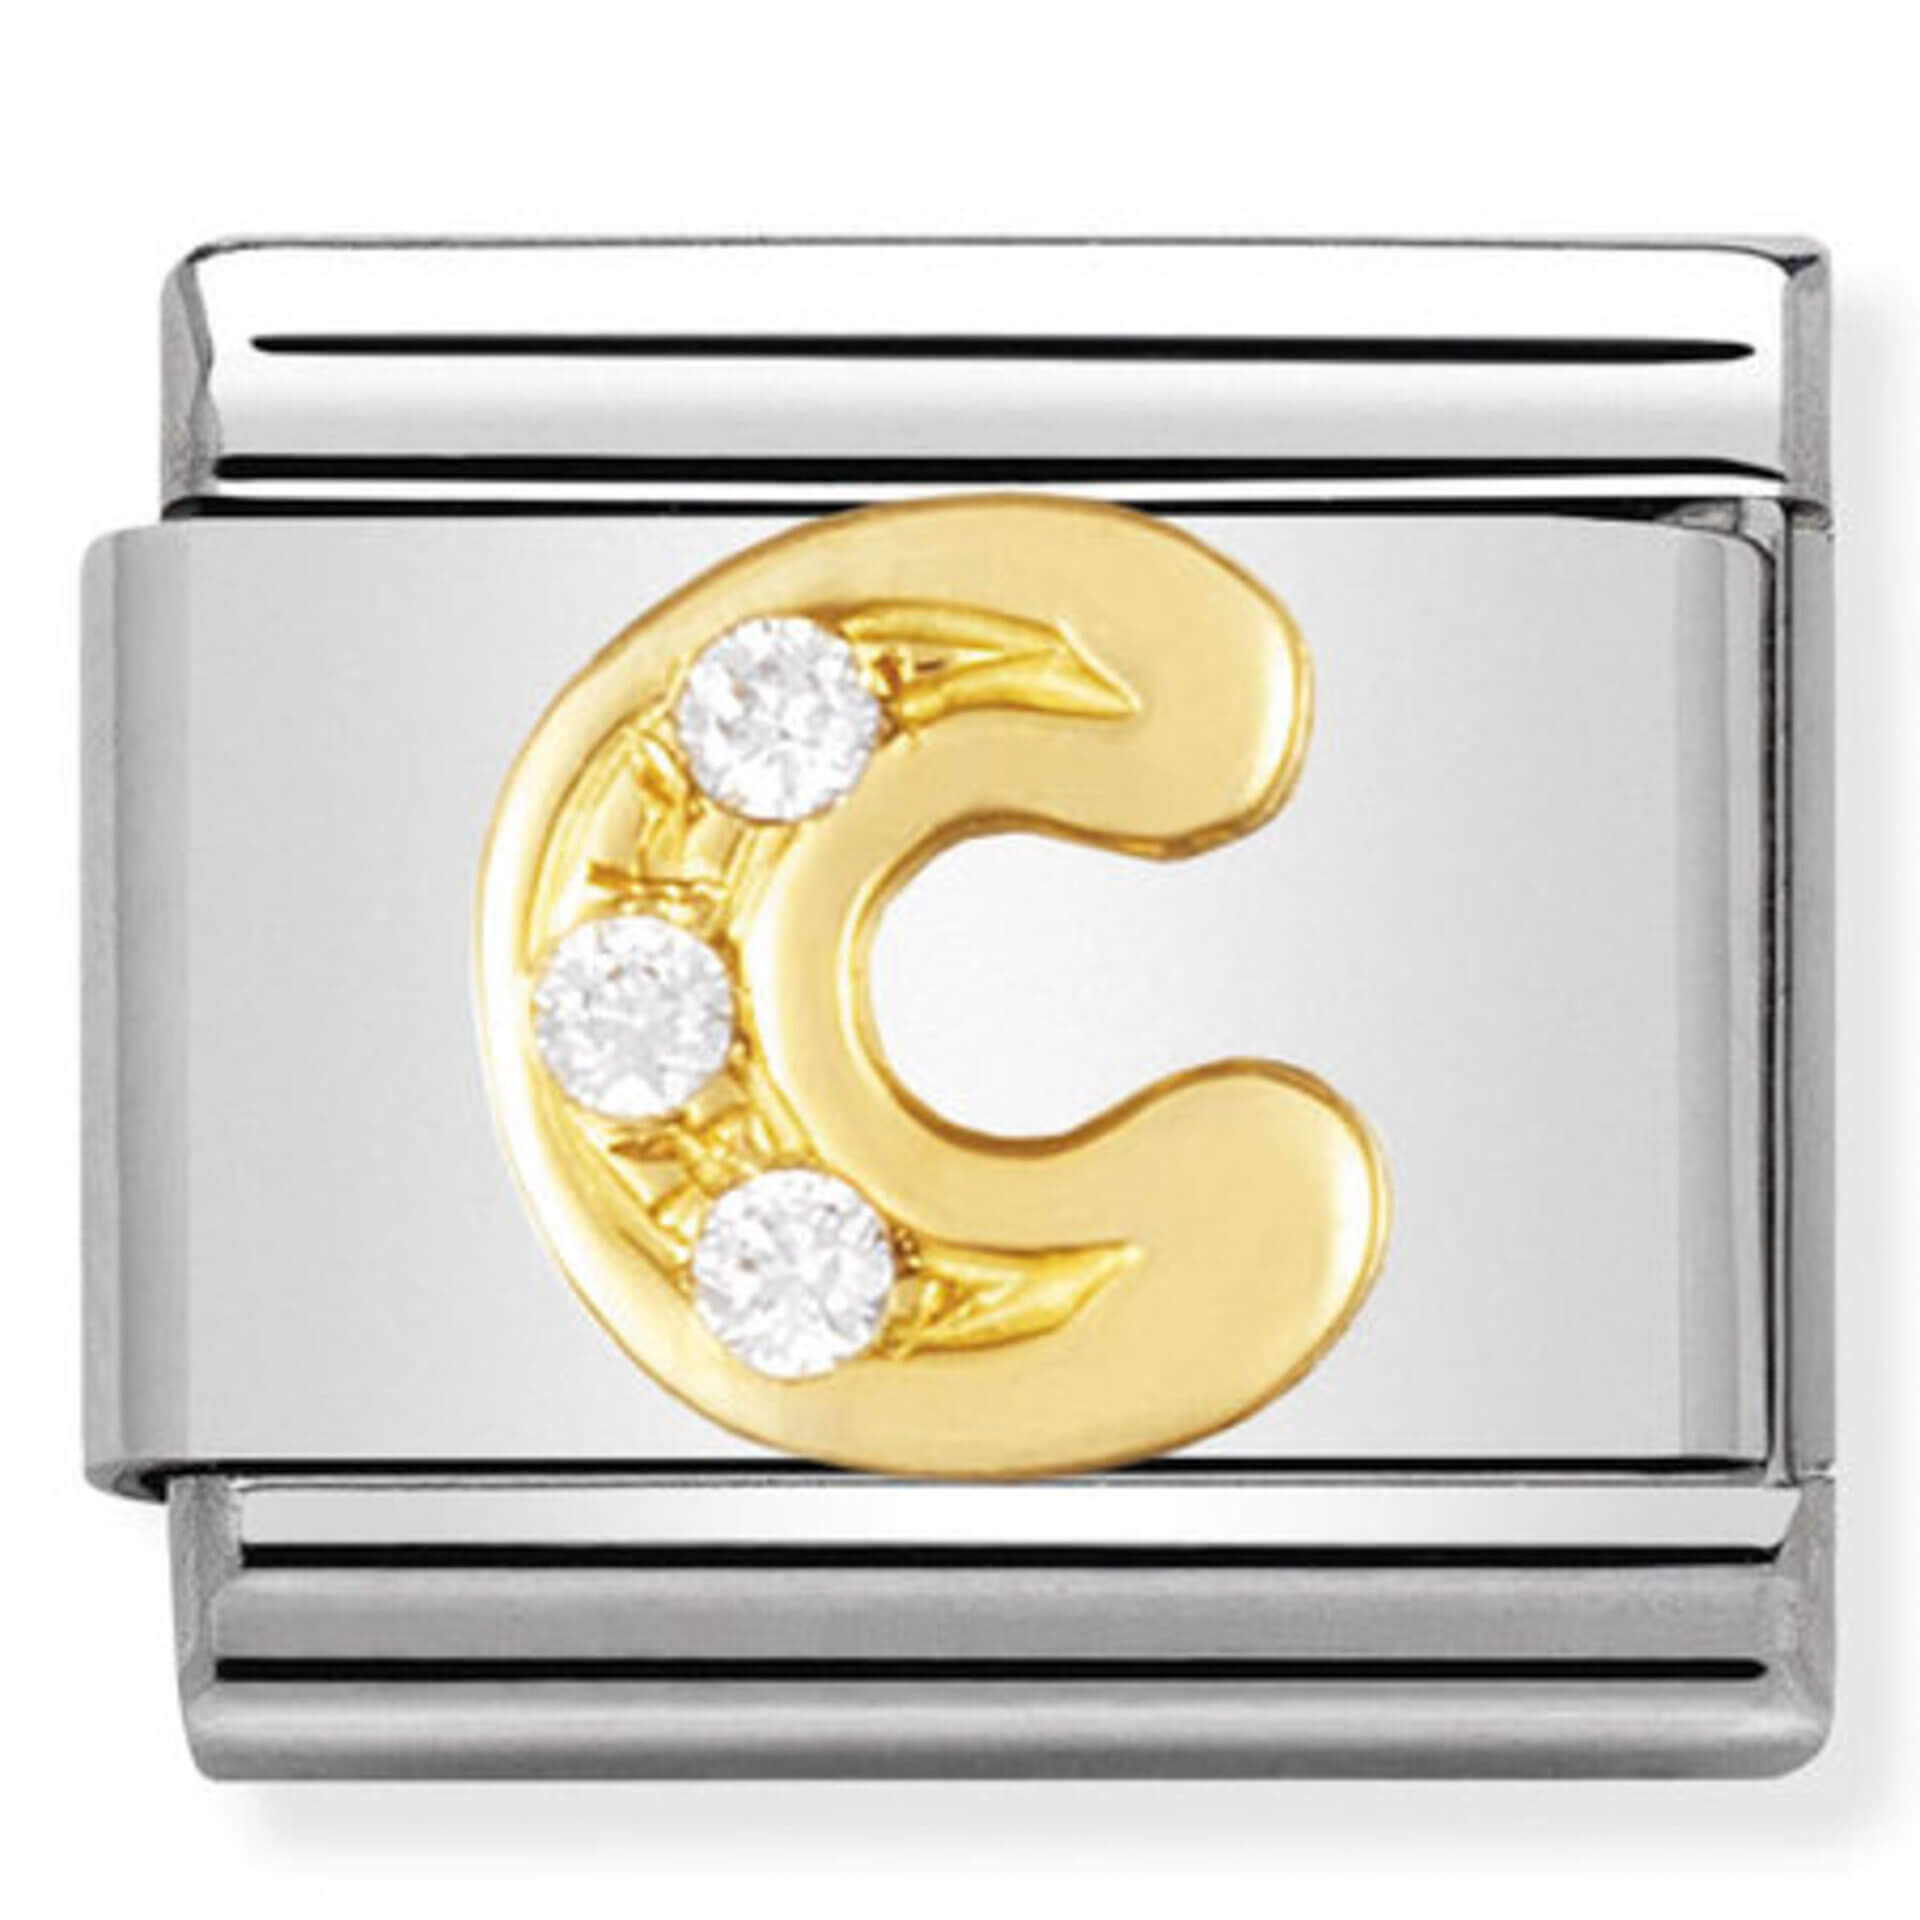 Nomination Gold Letter C - Christopher George Jewellers